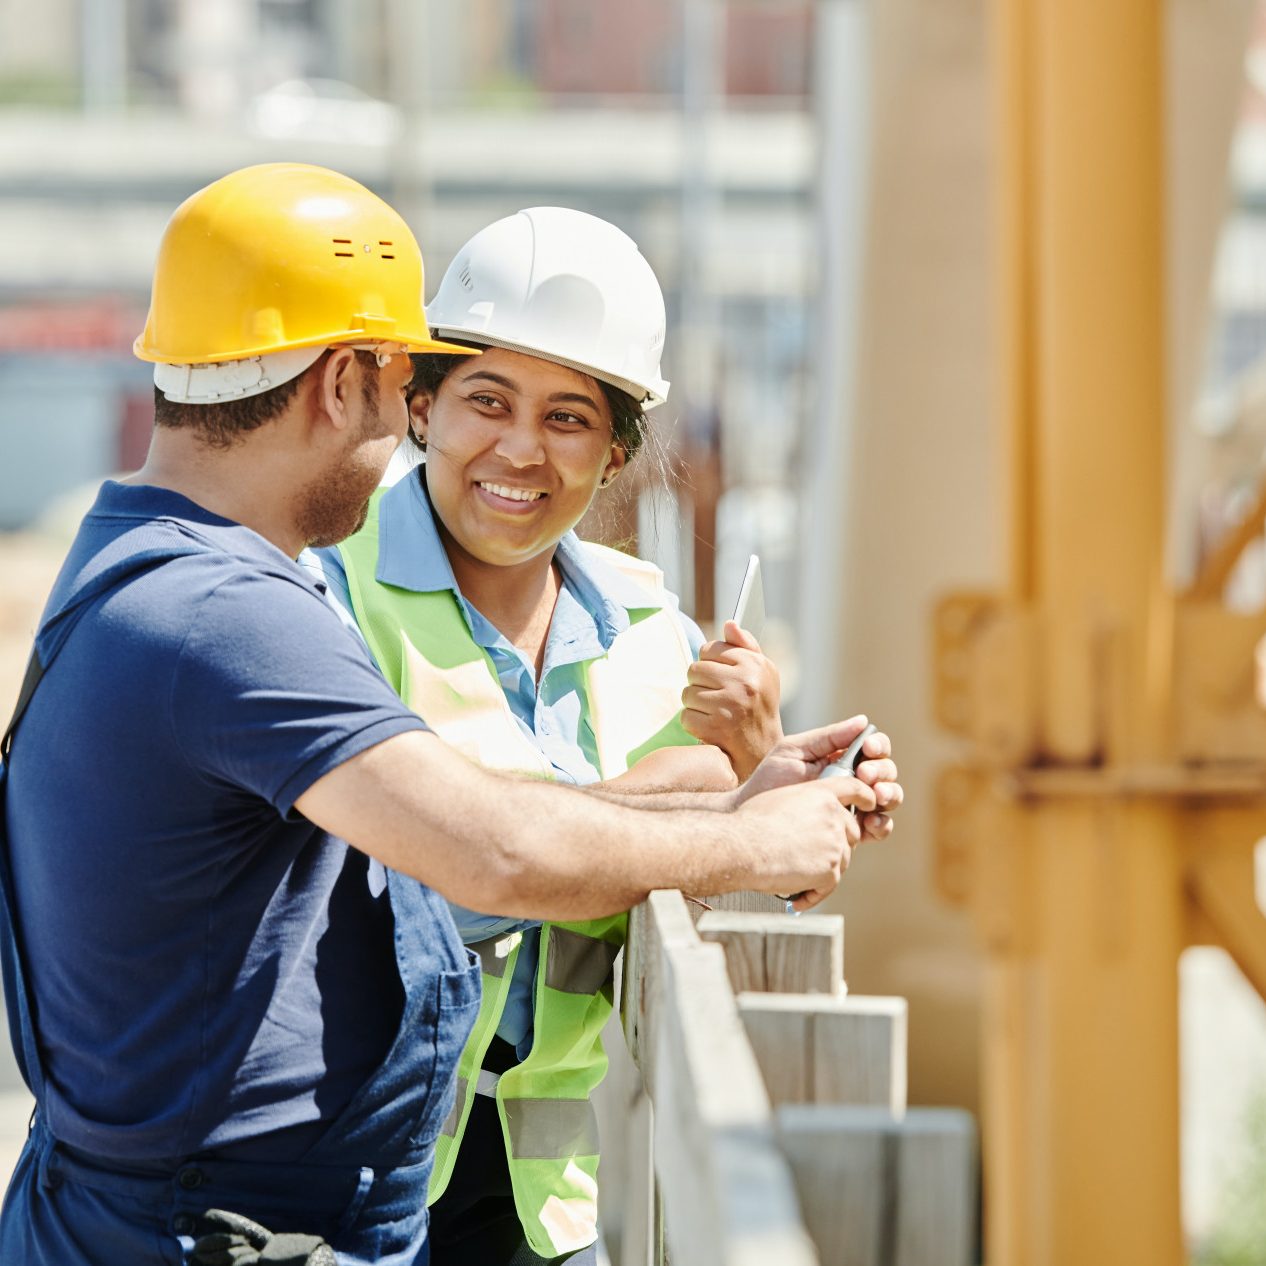 Two construction workers in hardhats conversing